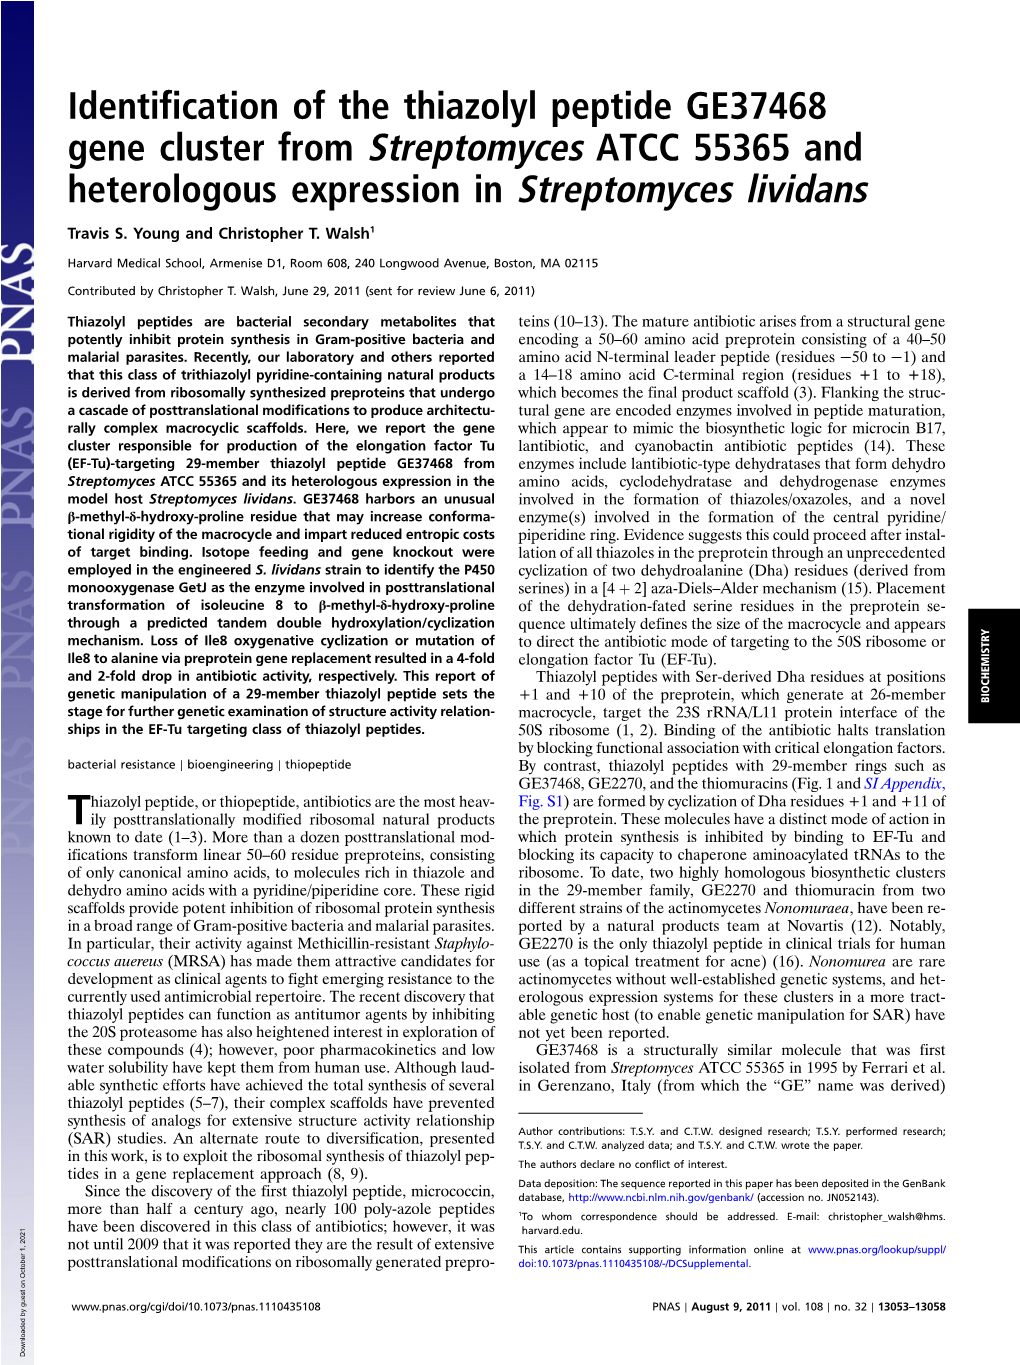 Identification of the Thiazolyl Peptide GE37468 Gene Cluster from Streptomyces ATCC 55365 and Heterologous Expression in Streptomyces Lividans